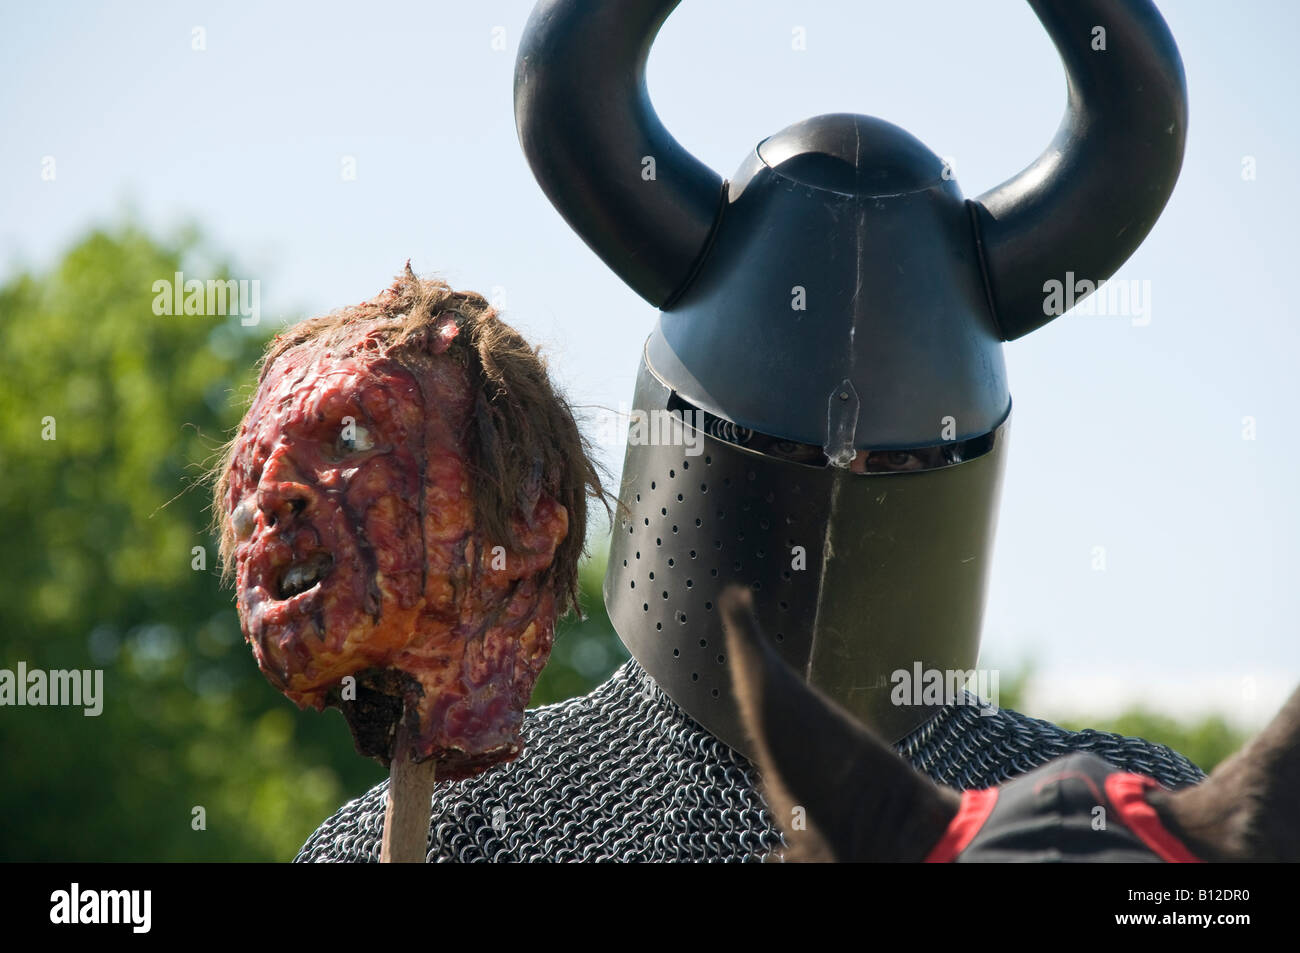 Medieval Knight wearing horned helmet, carrying a pole with a decapitated head. Stock Photo